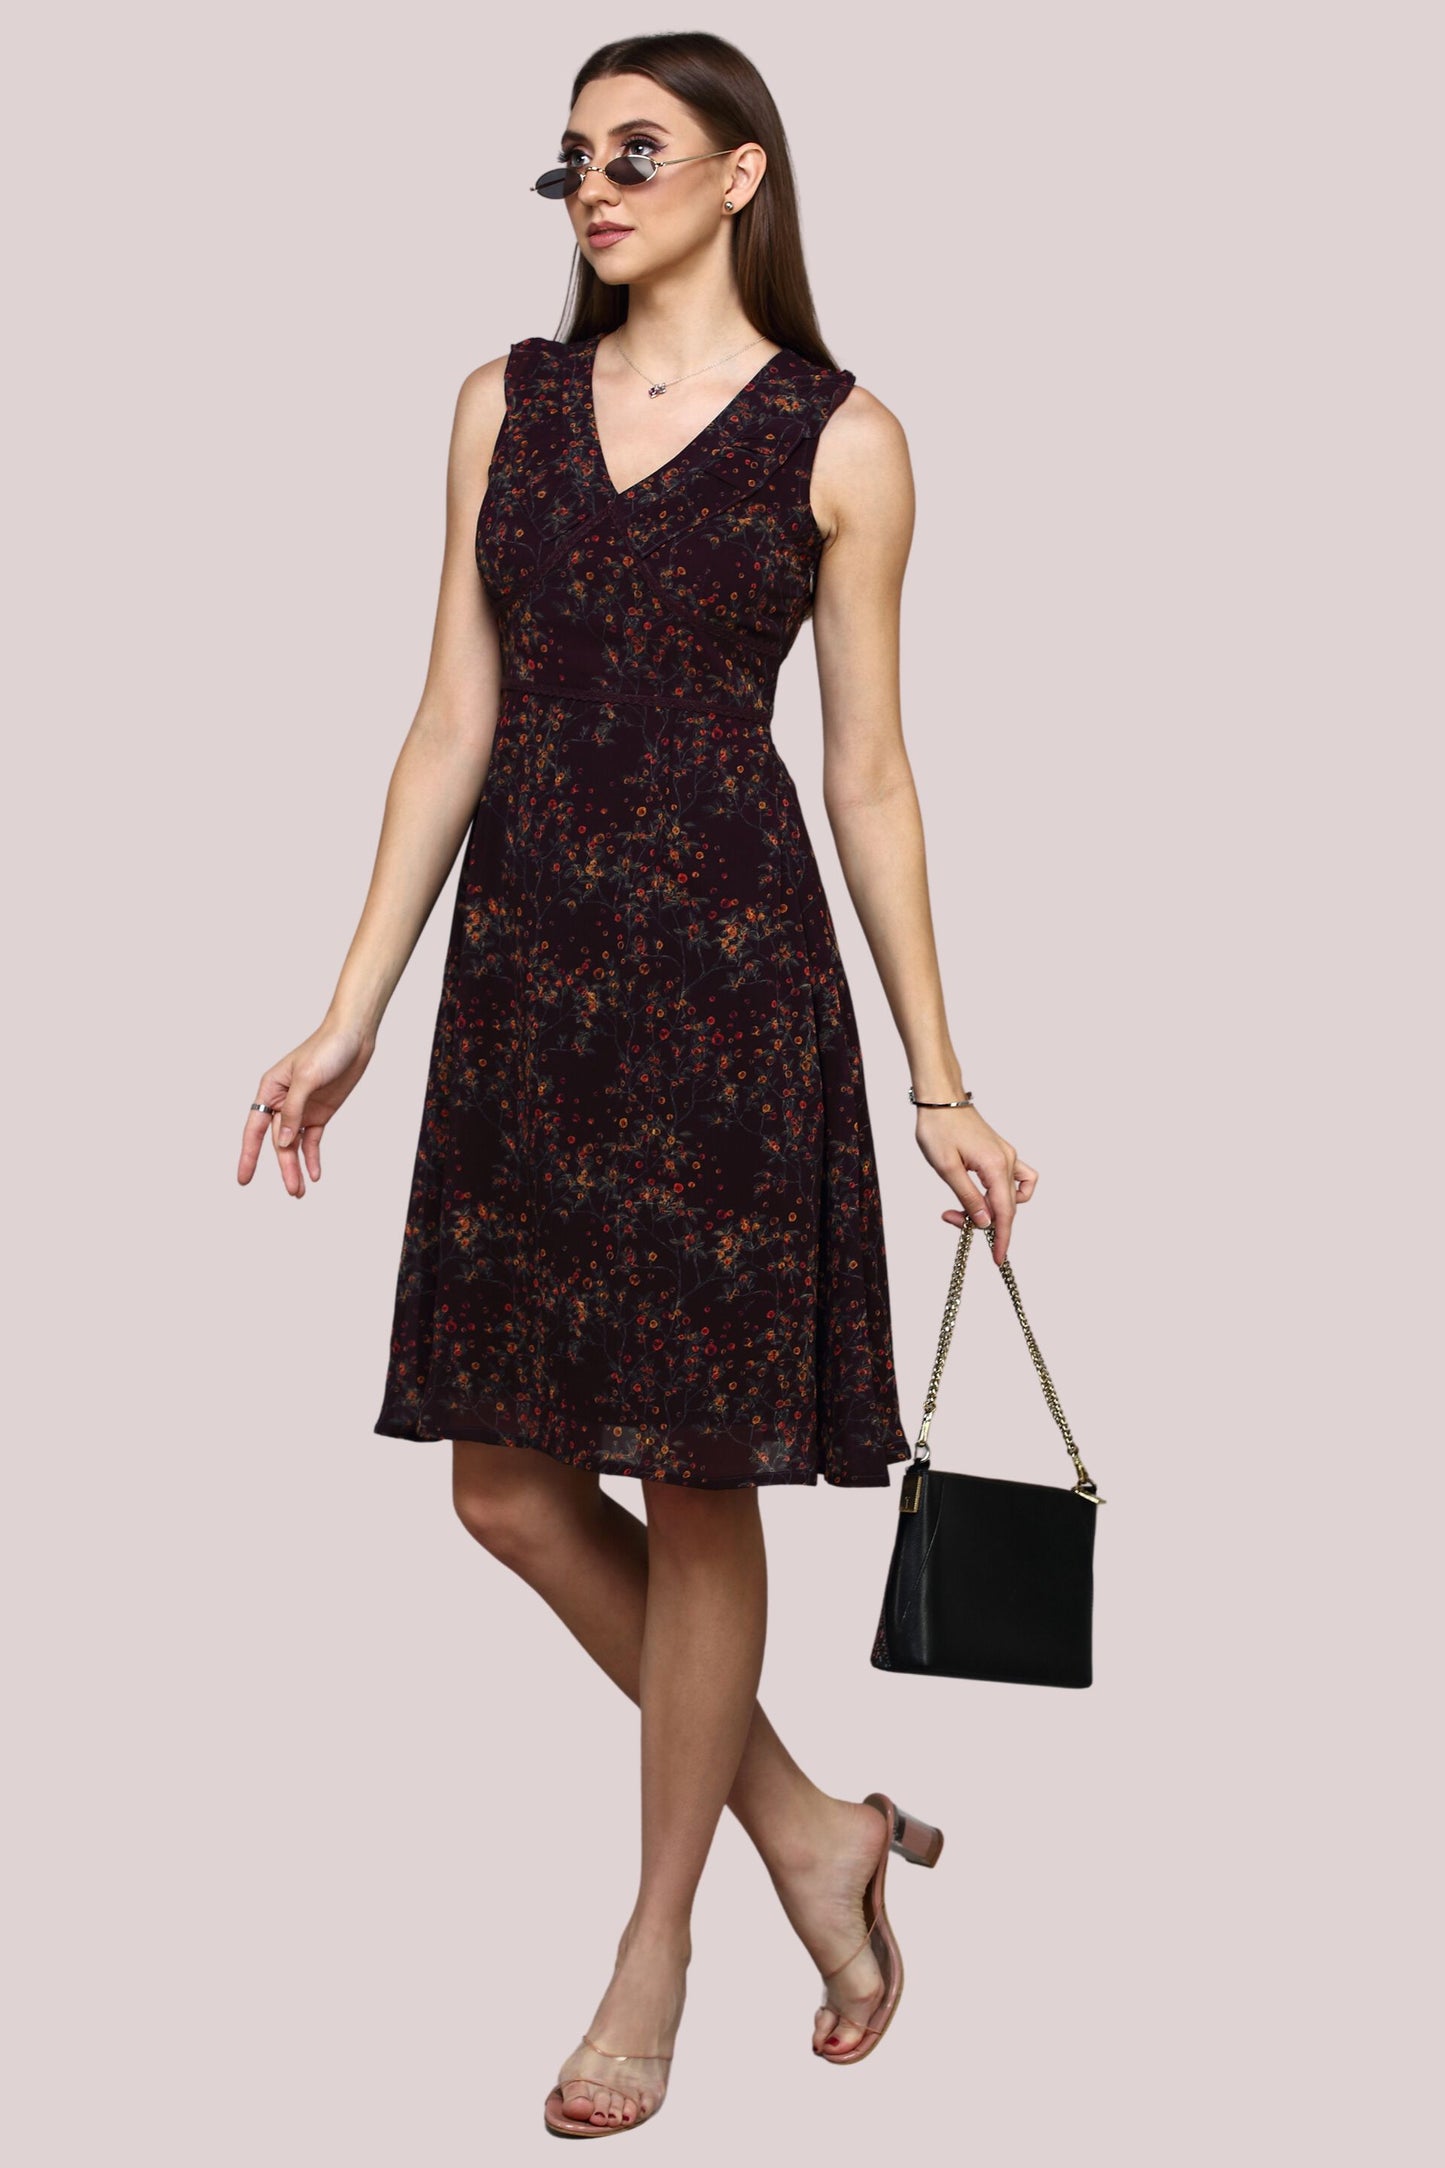 Printed frill dress with lace detail